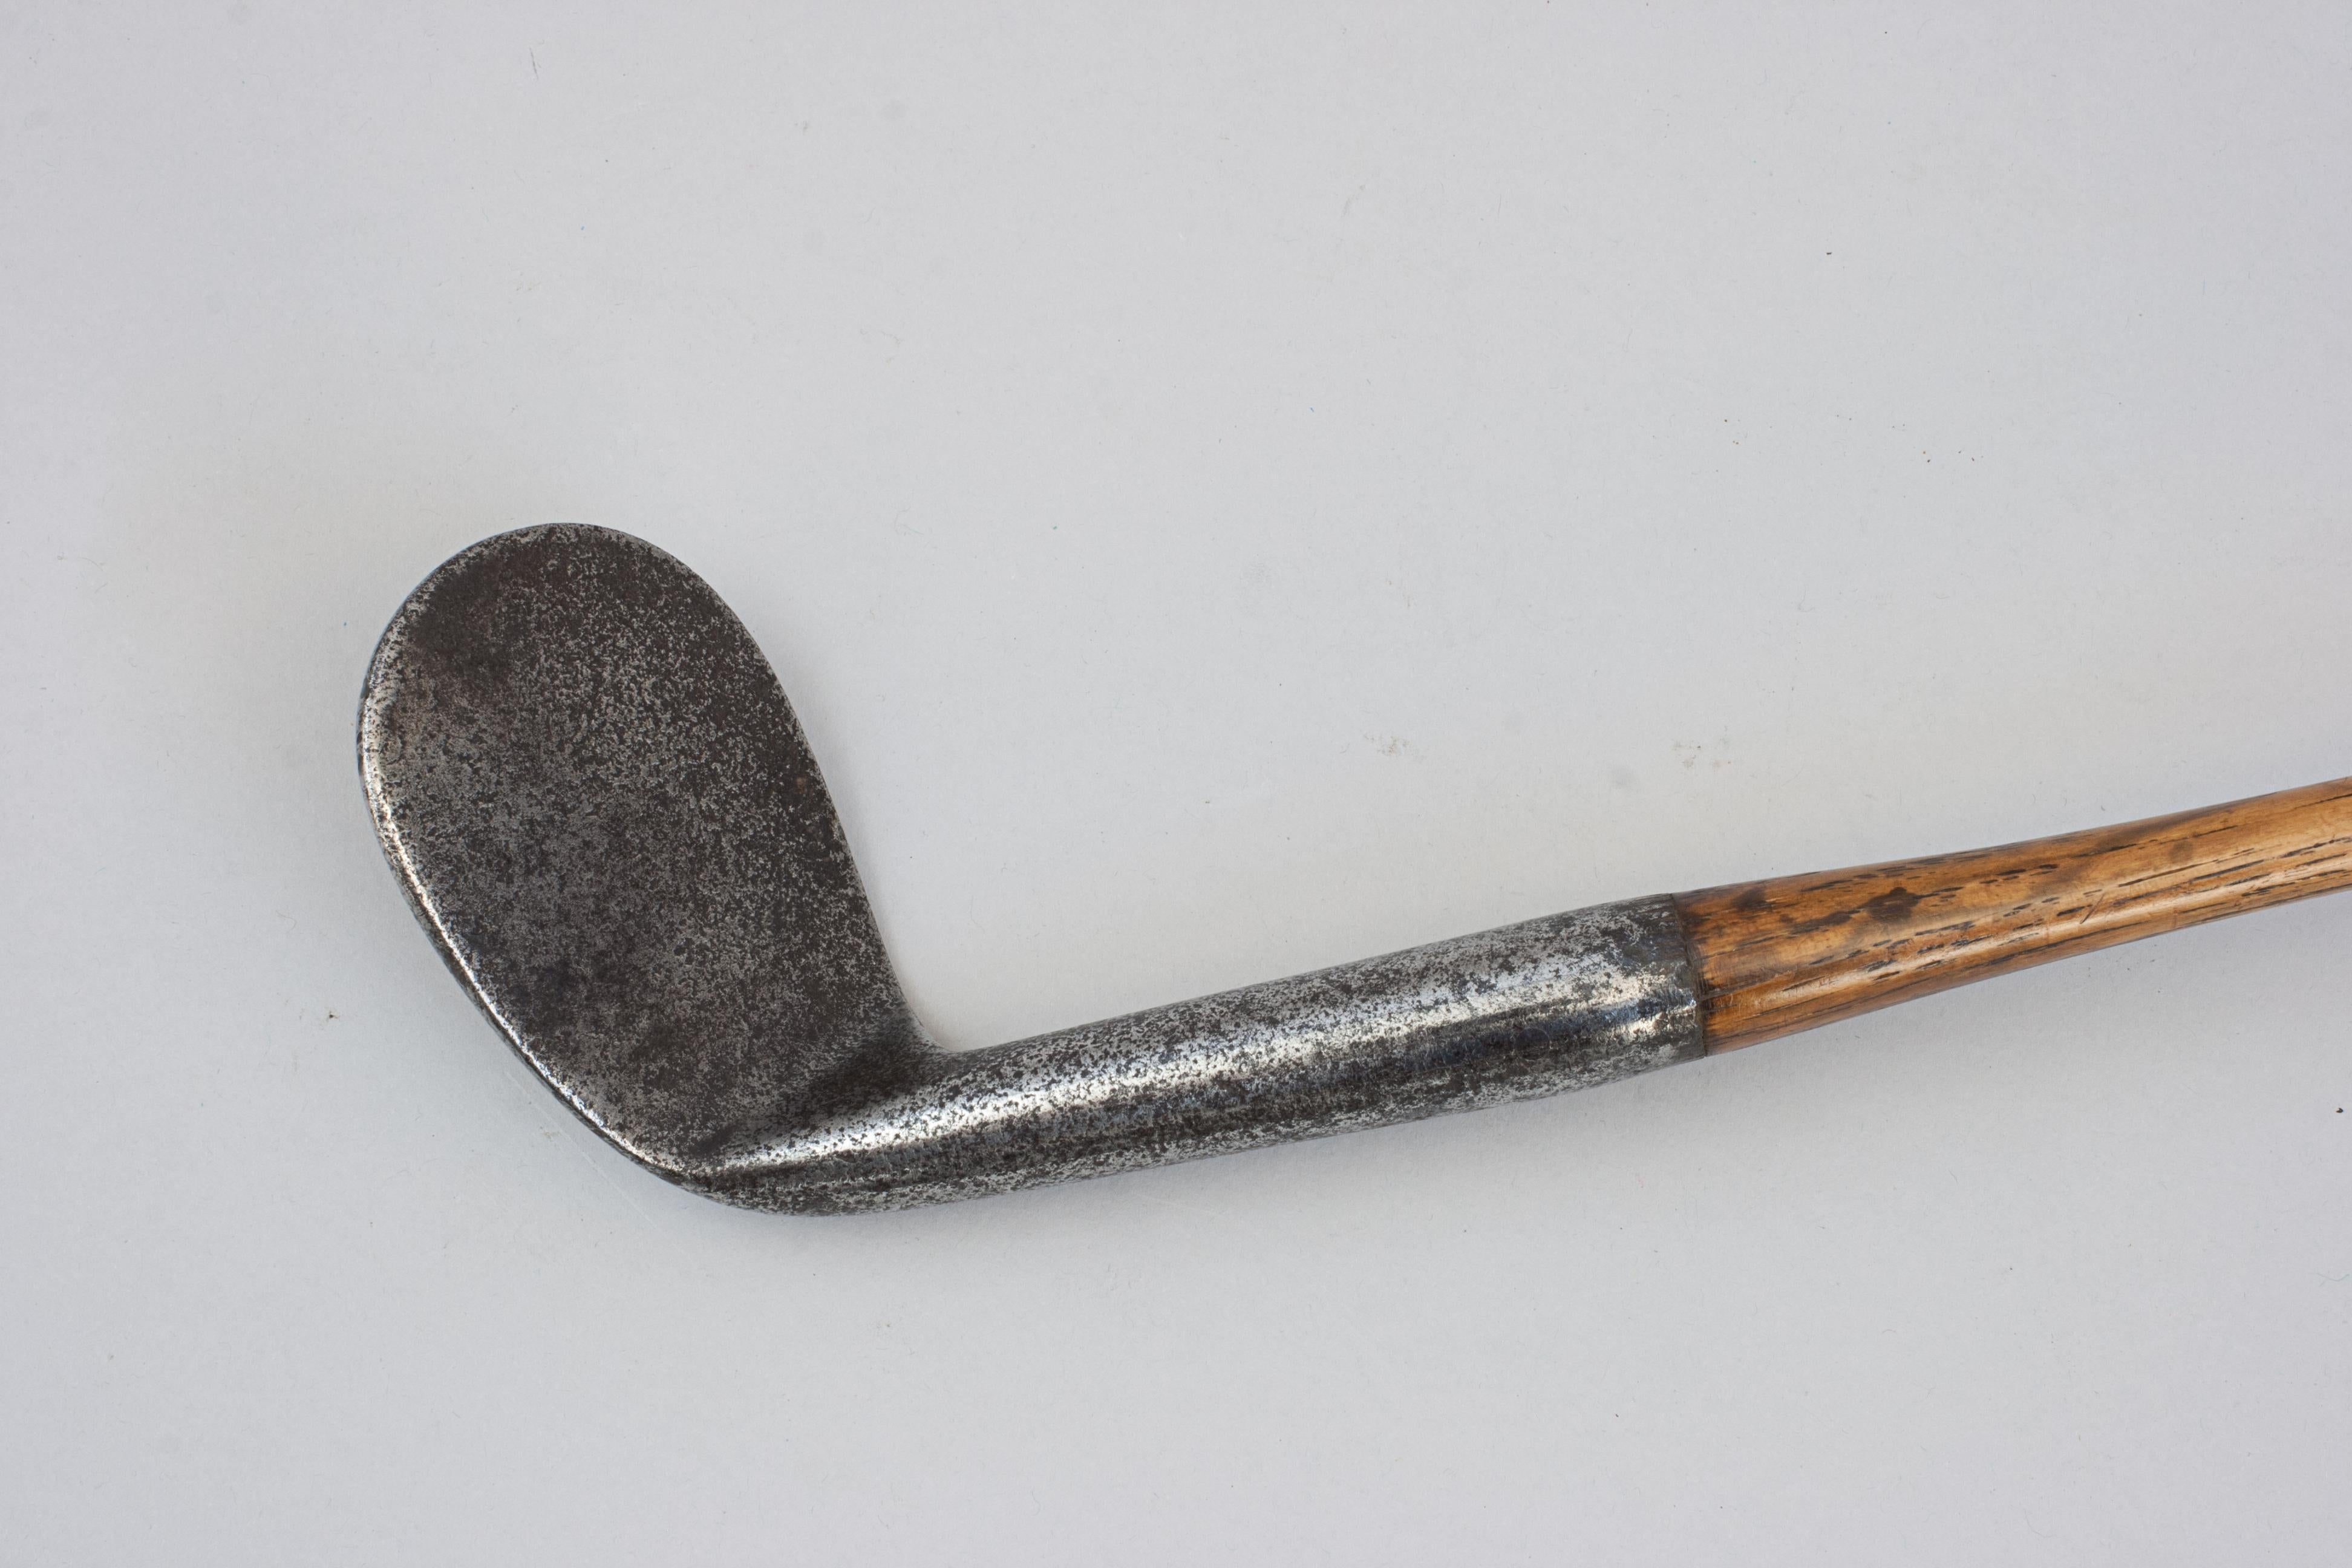 Antique Rut Niblick, Hickory Shafted Golf Club In Good Condition For Sale In Oxfordshire, GB